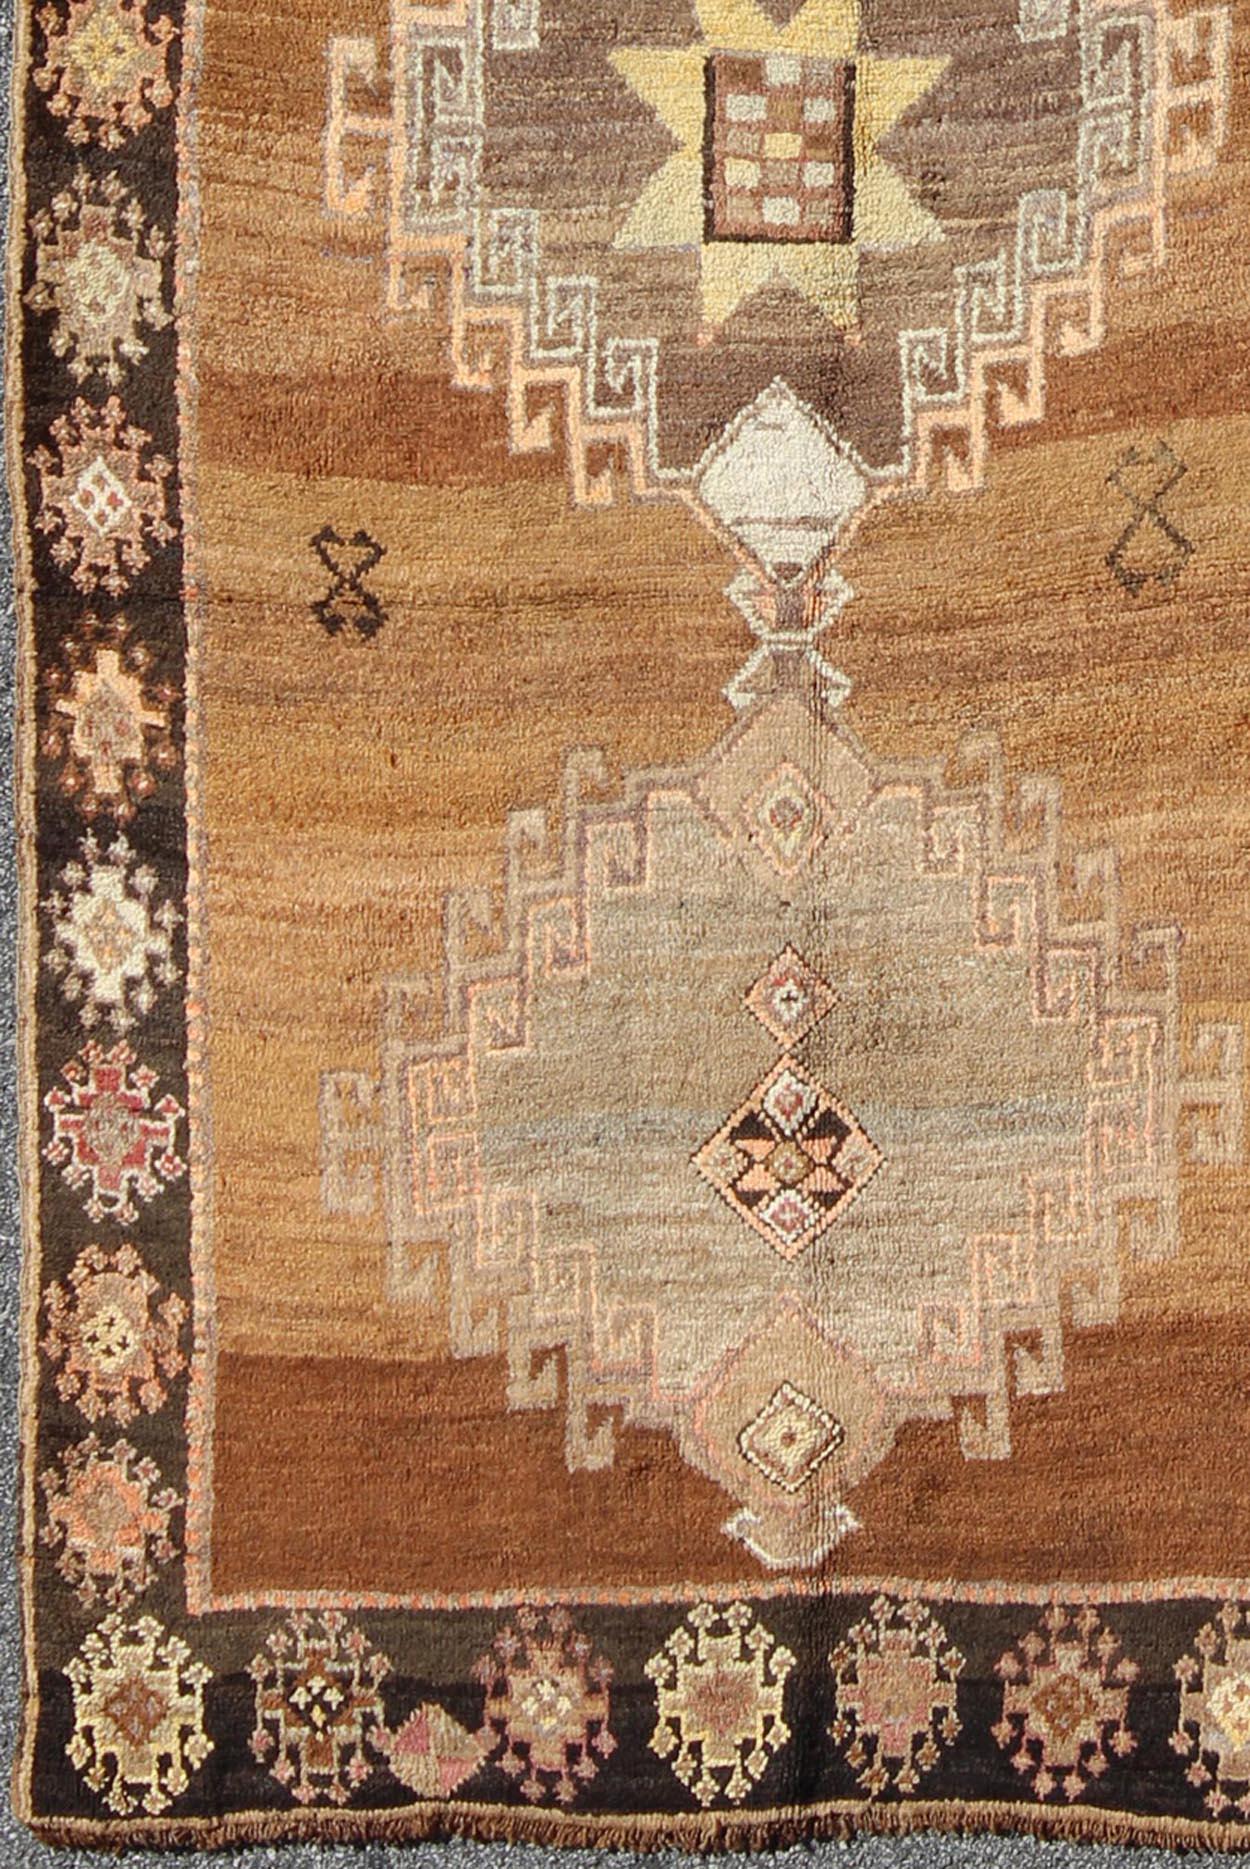 Measures: 4'6 x 10'11

This Kars Oushak features a triple center medallion with an overall geometric design scheme. The camel colored background homes three large tribal medallions, rendered in shades of taupe. The border has geometric repeating